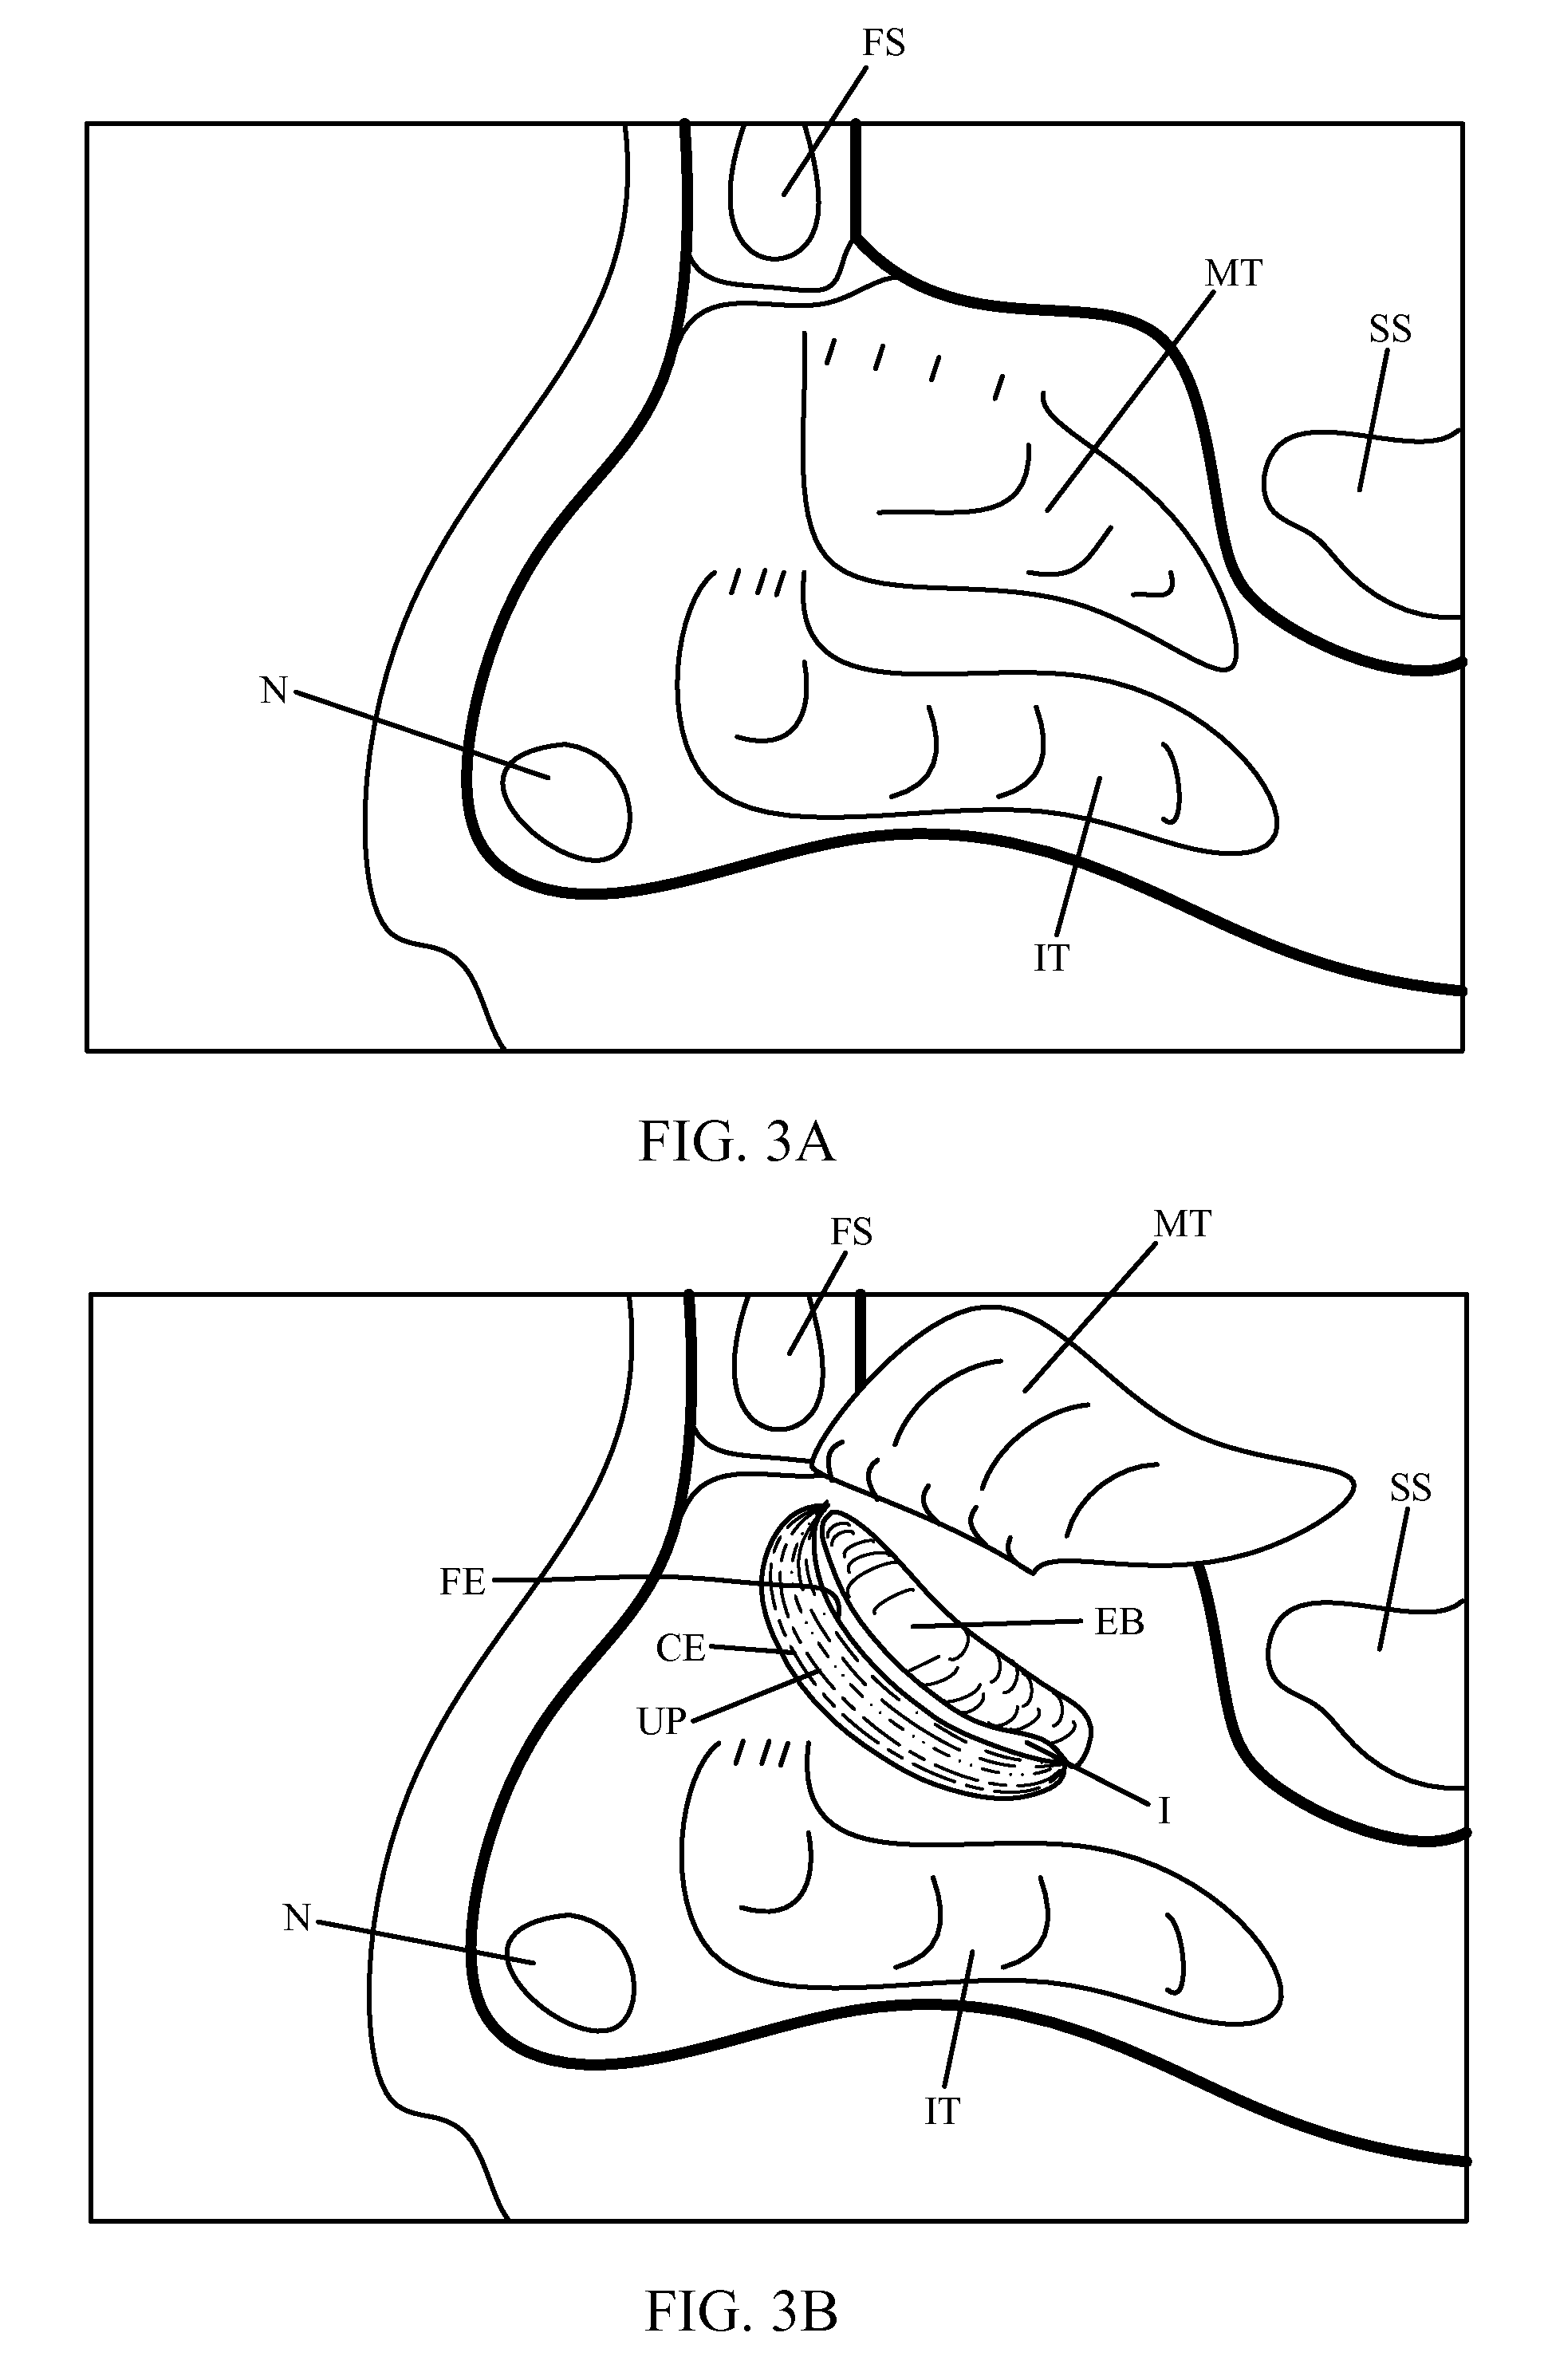 Method and device for remodeling the uncinate process